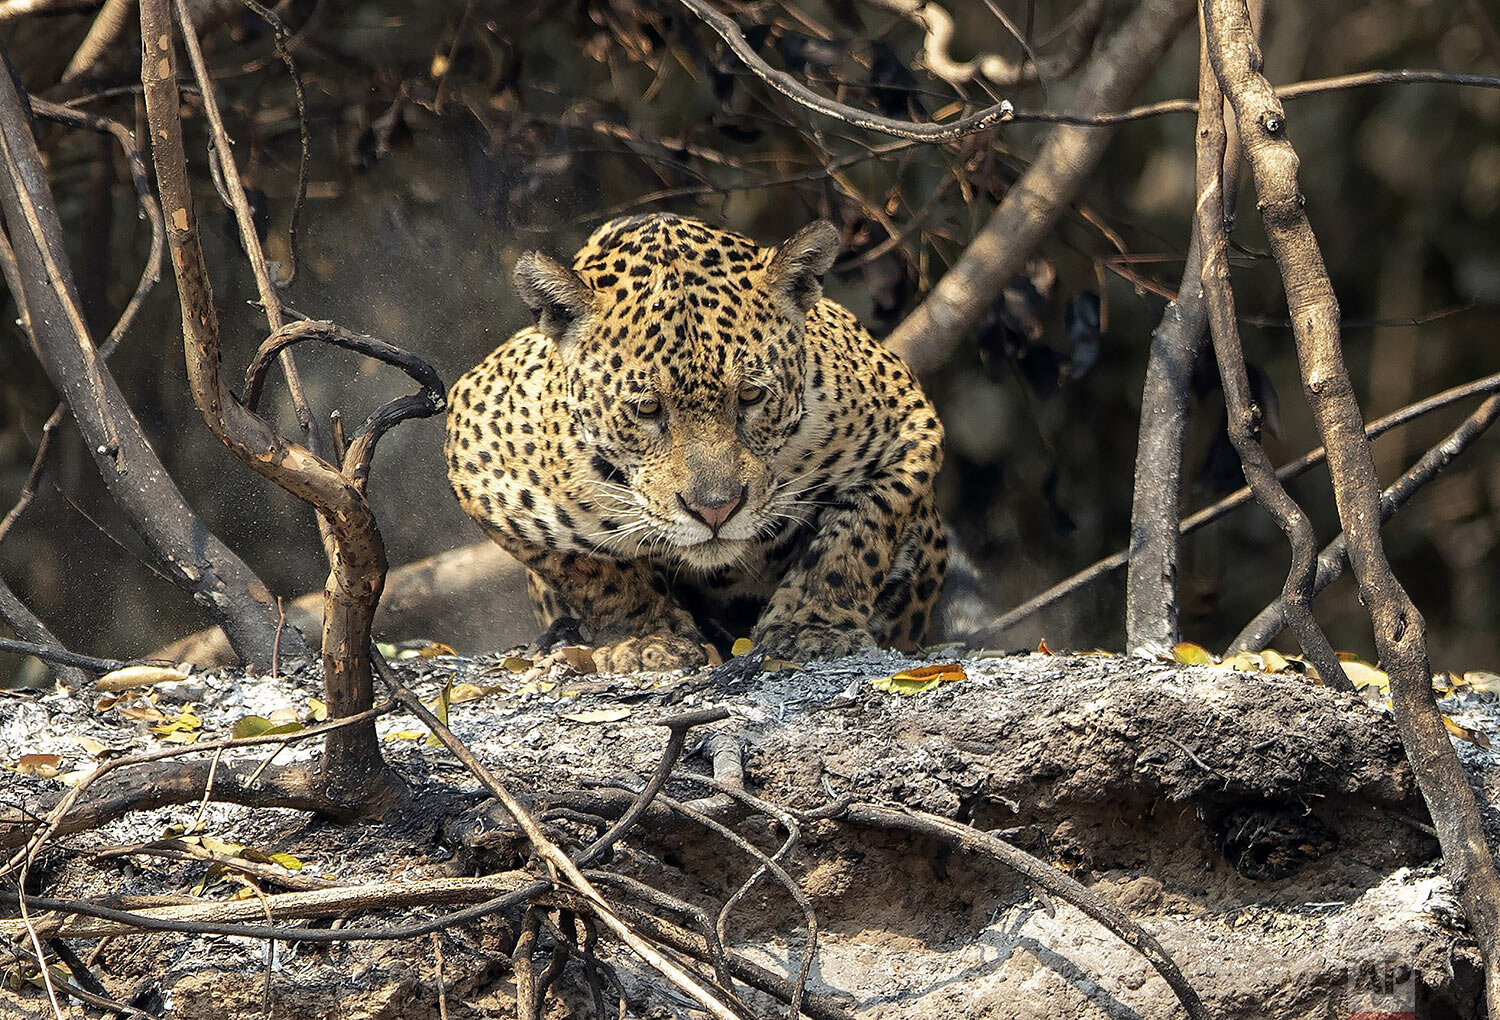  A jaguar crouches on an area recently scorched by wildfires at the Encontro das Aguas park in the Pantanal wetlands near Pocone, Mato Grosso state, Brazil, Sept. 13, 2020. Firefighters, troops and volunteers have been scrambling to rescue animals be